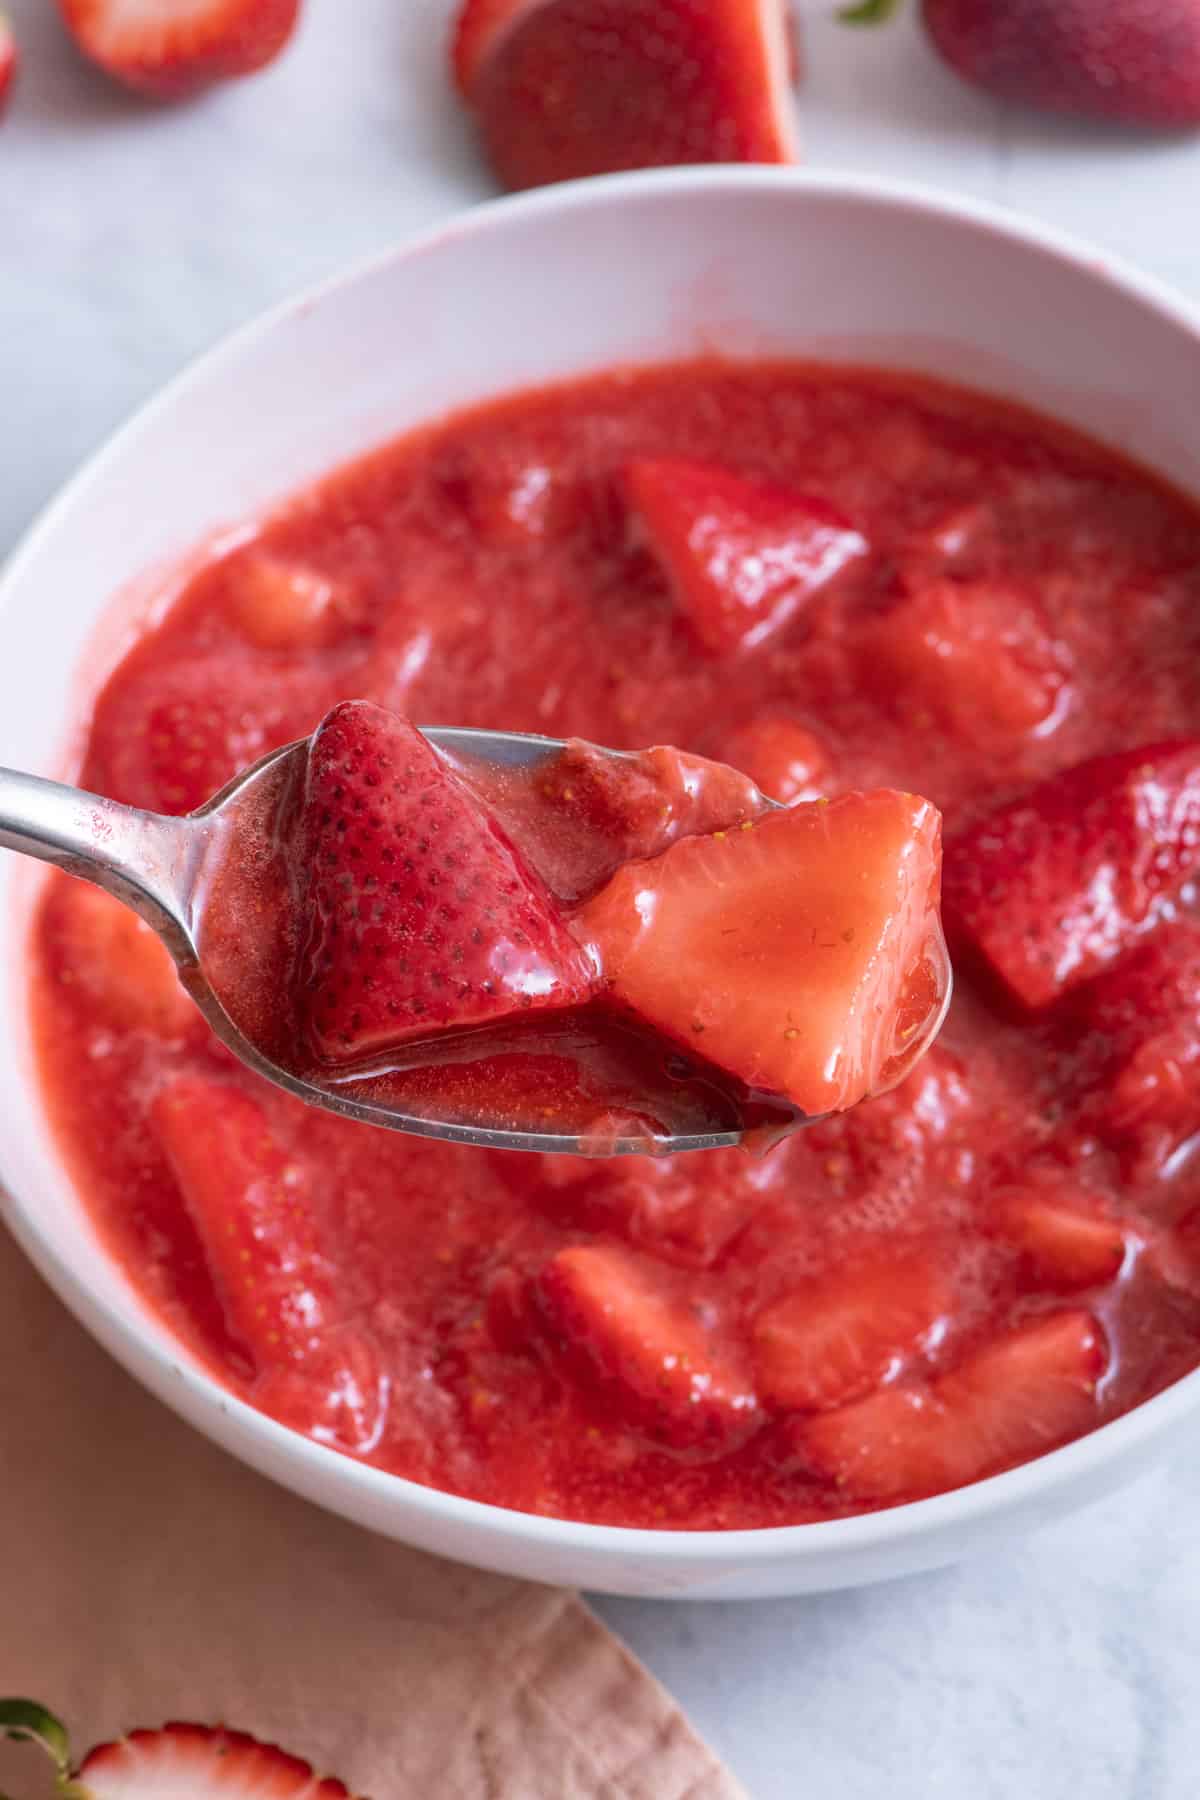 Spoon scooping out strawberries from bowl.